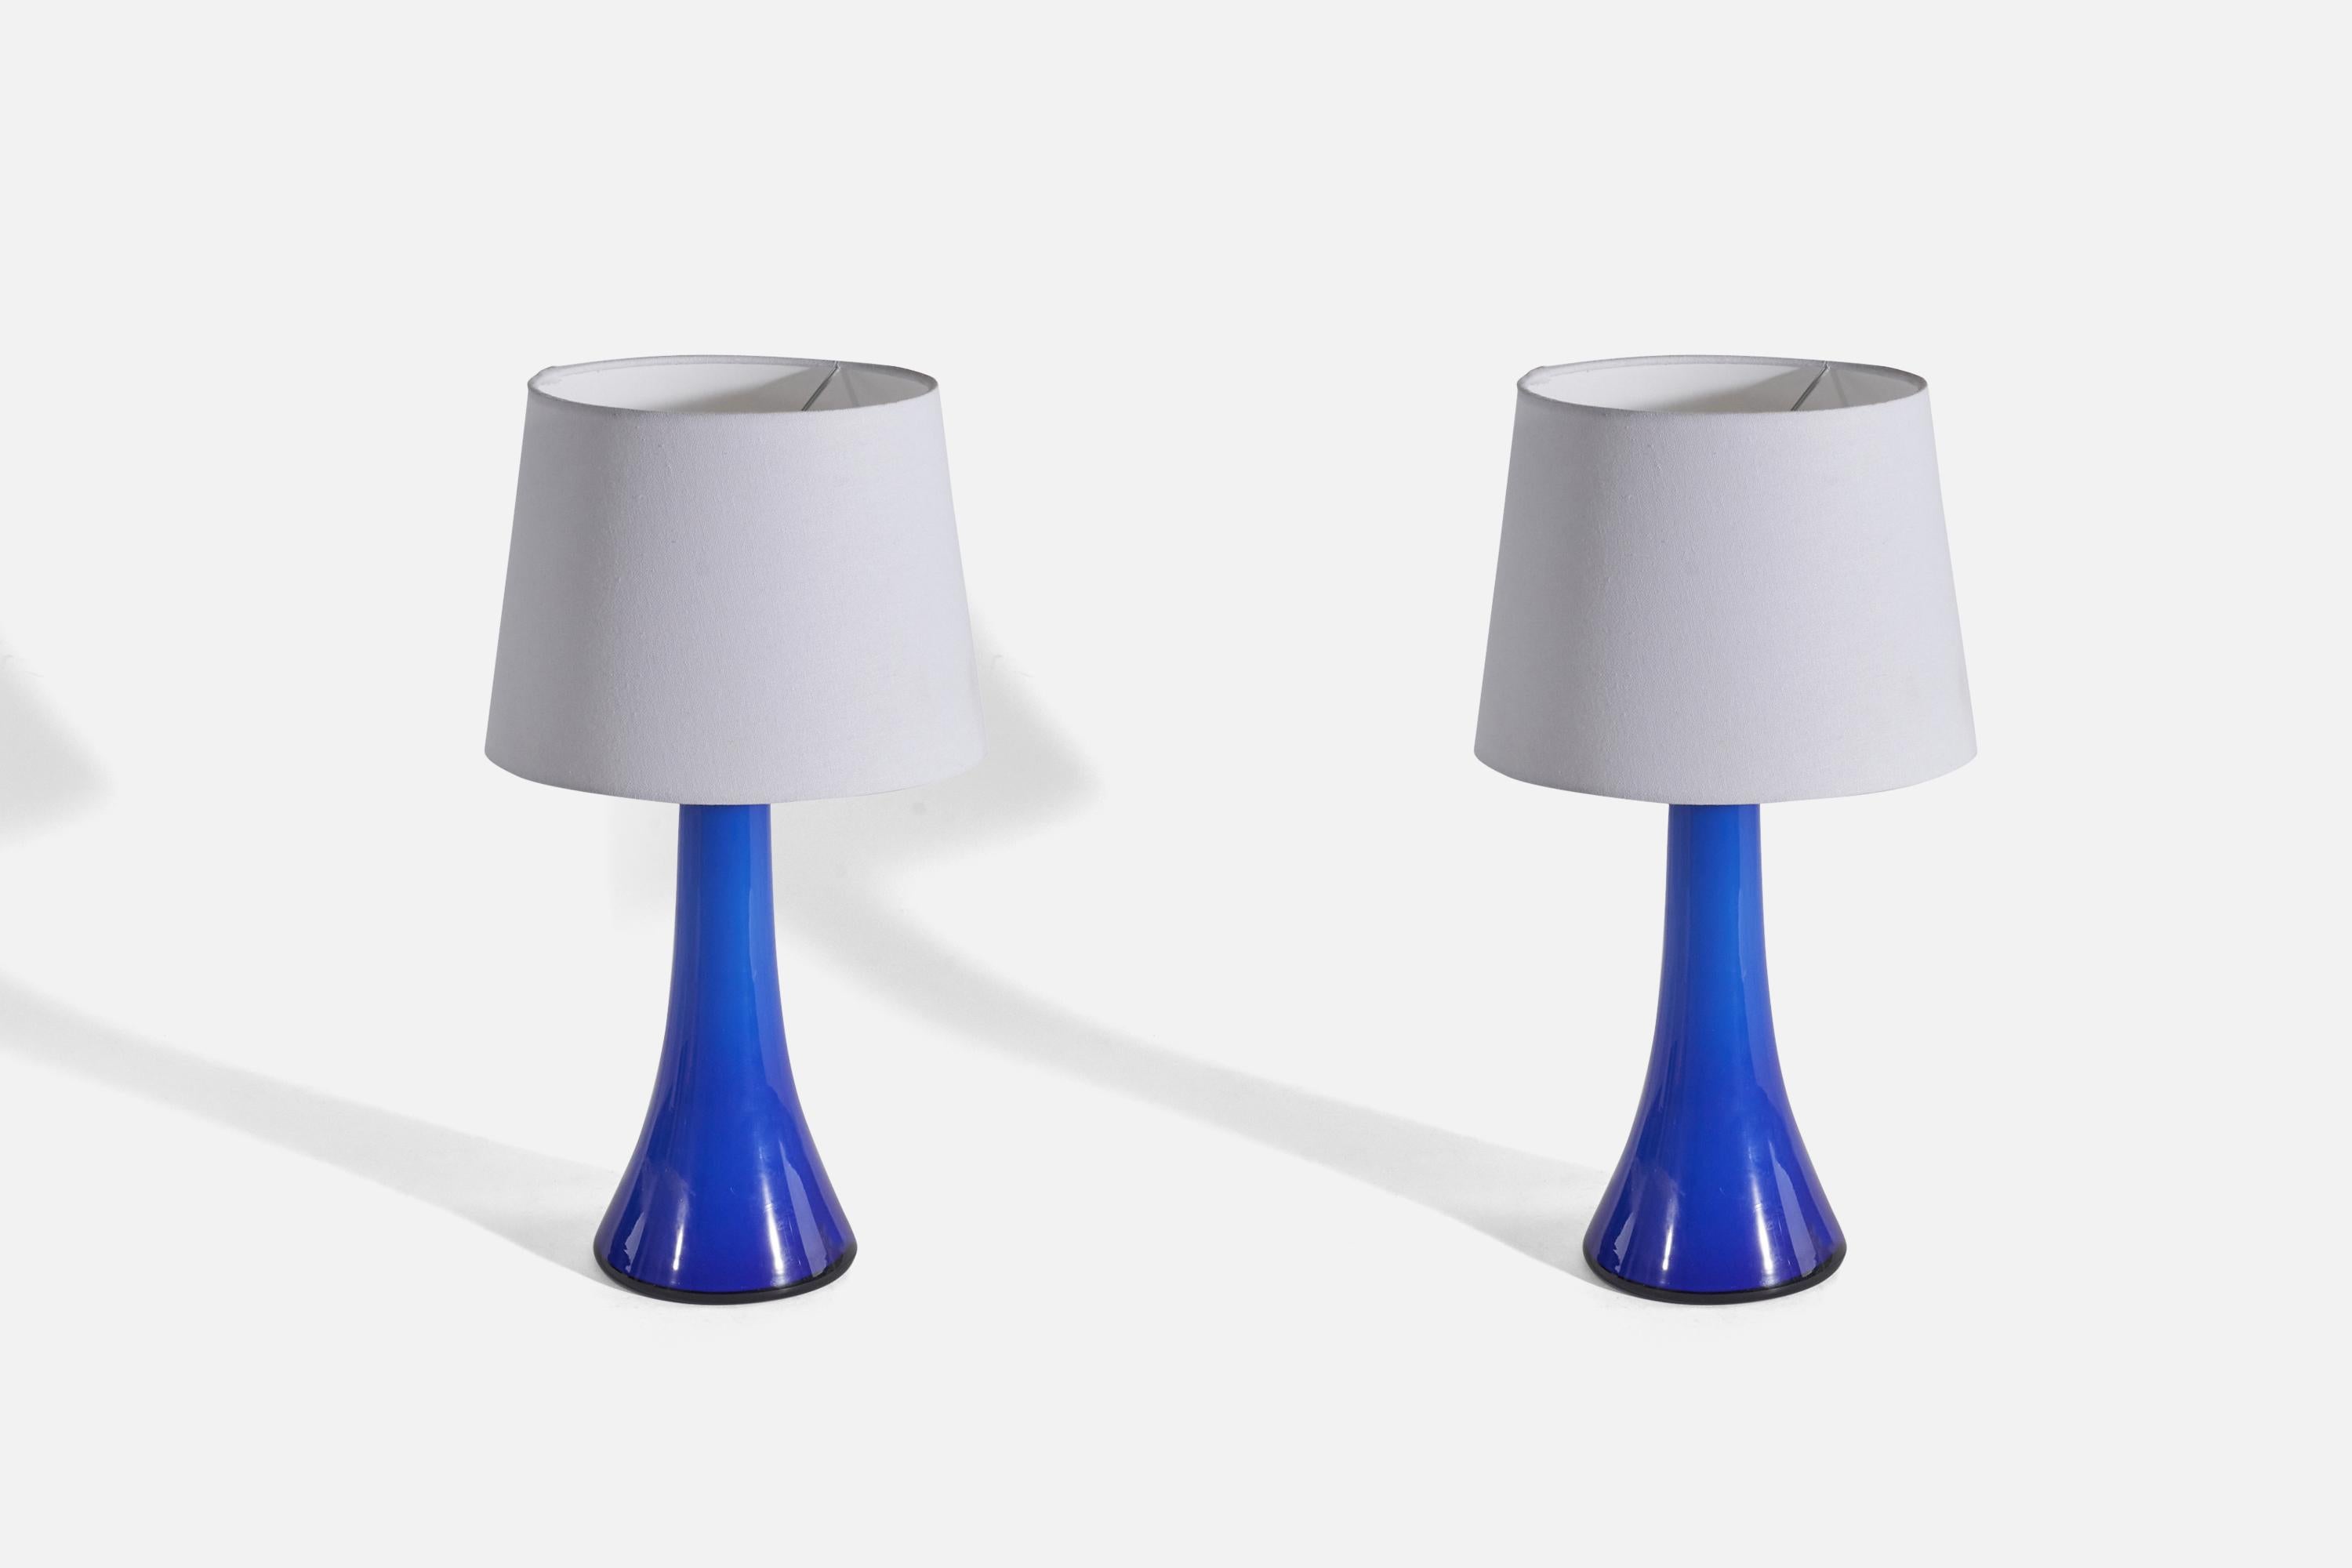 A pair of blue glass table lamps designed by Gert Nyström and produced by Hyllinge Glasbruk, Sweden, 1960s. 

Sold without Lampshade(s).
Dimensions of Lamp (inches) : 13.68 x 5.38 x 5.38 (Height x Width x Depth)
Dimensions of Shade (inches) : 8 x 10